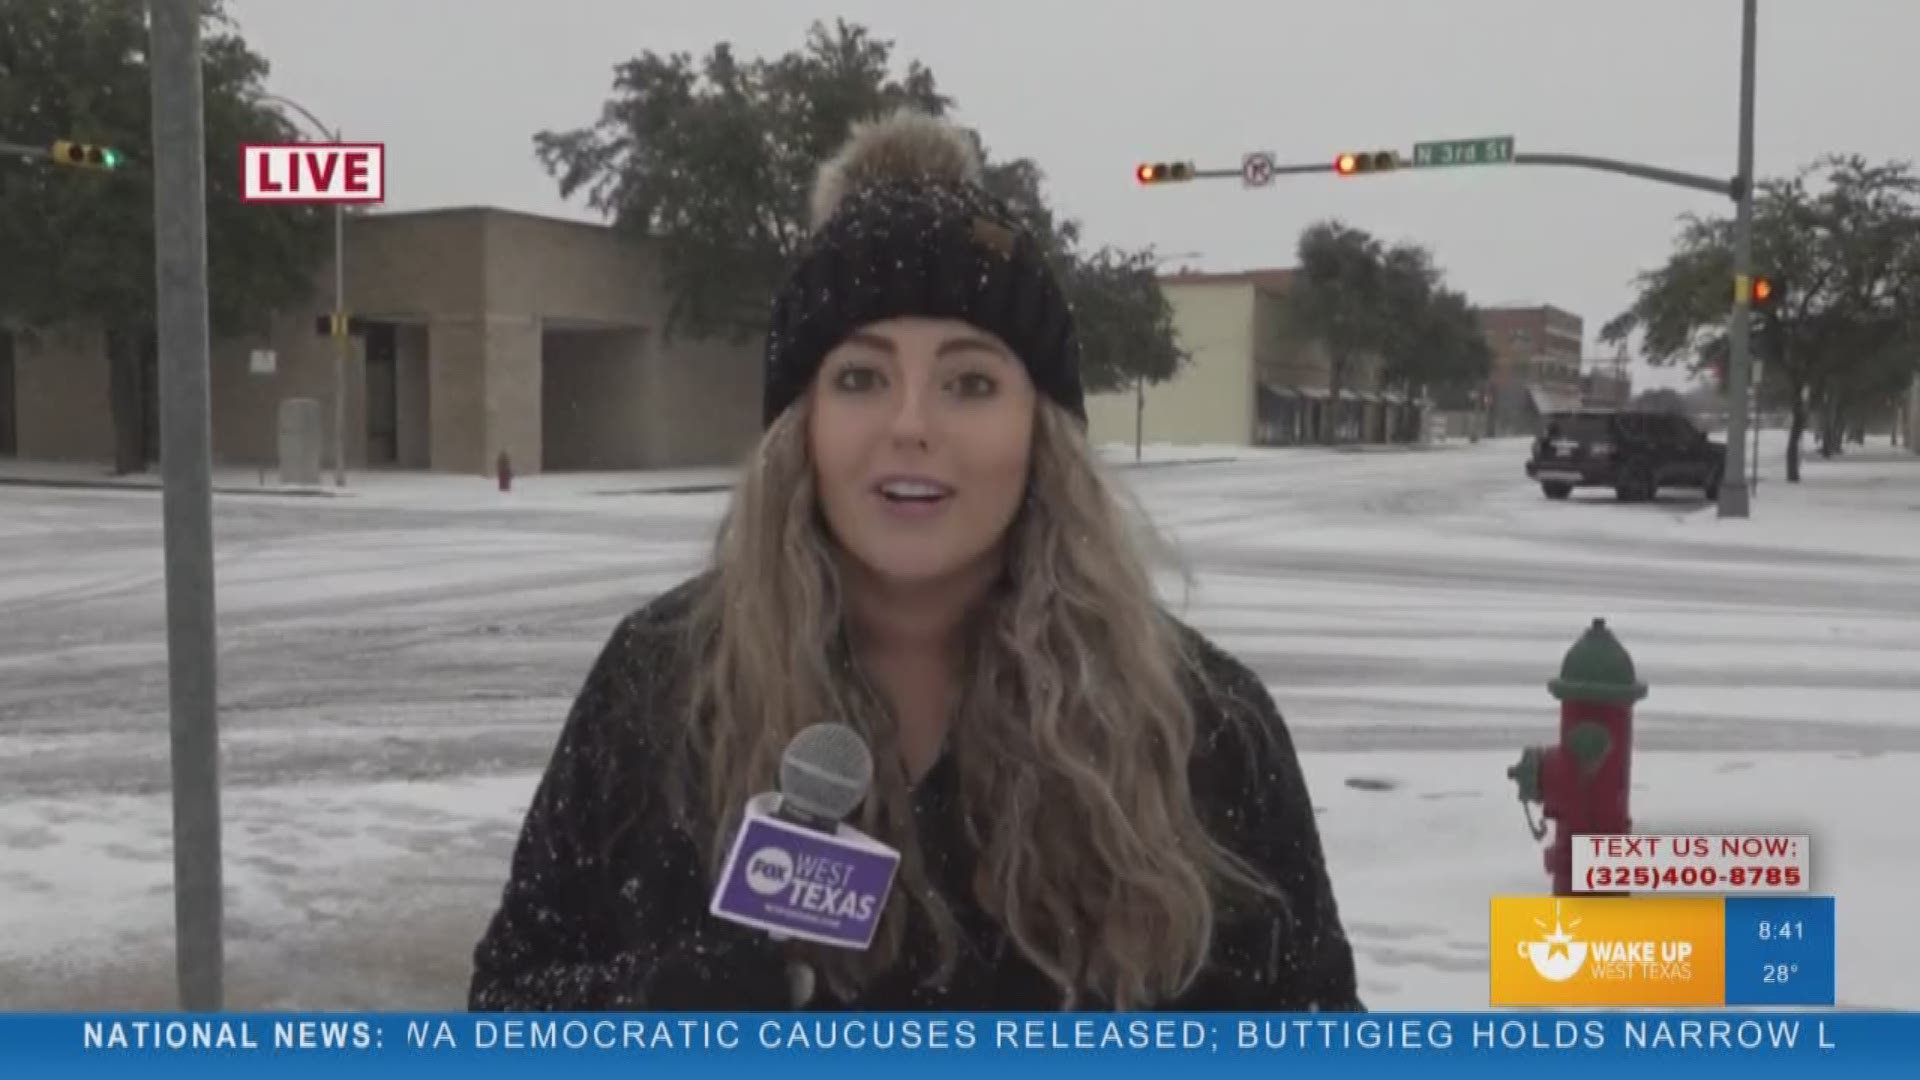 Casey Buscher updates what the road conditions are in Abilene